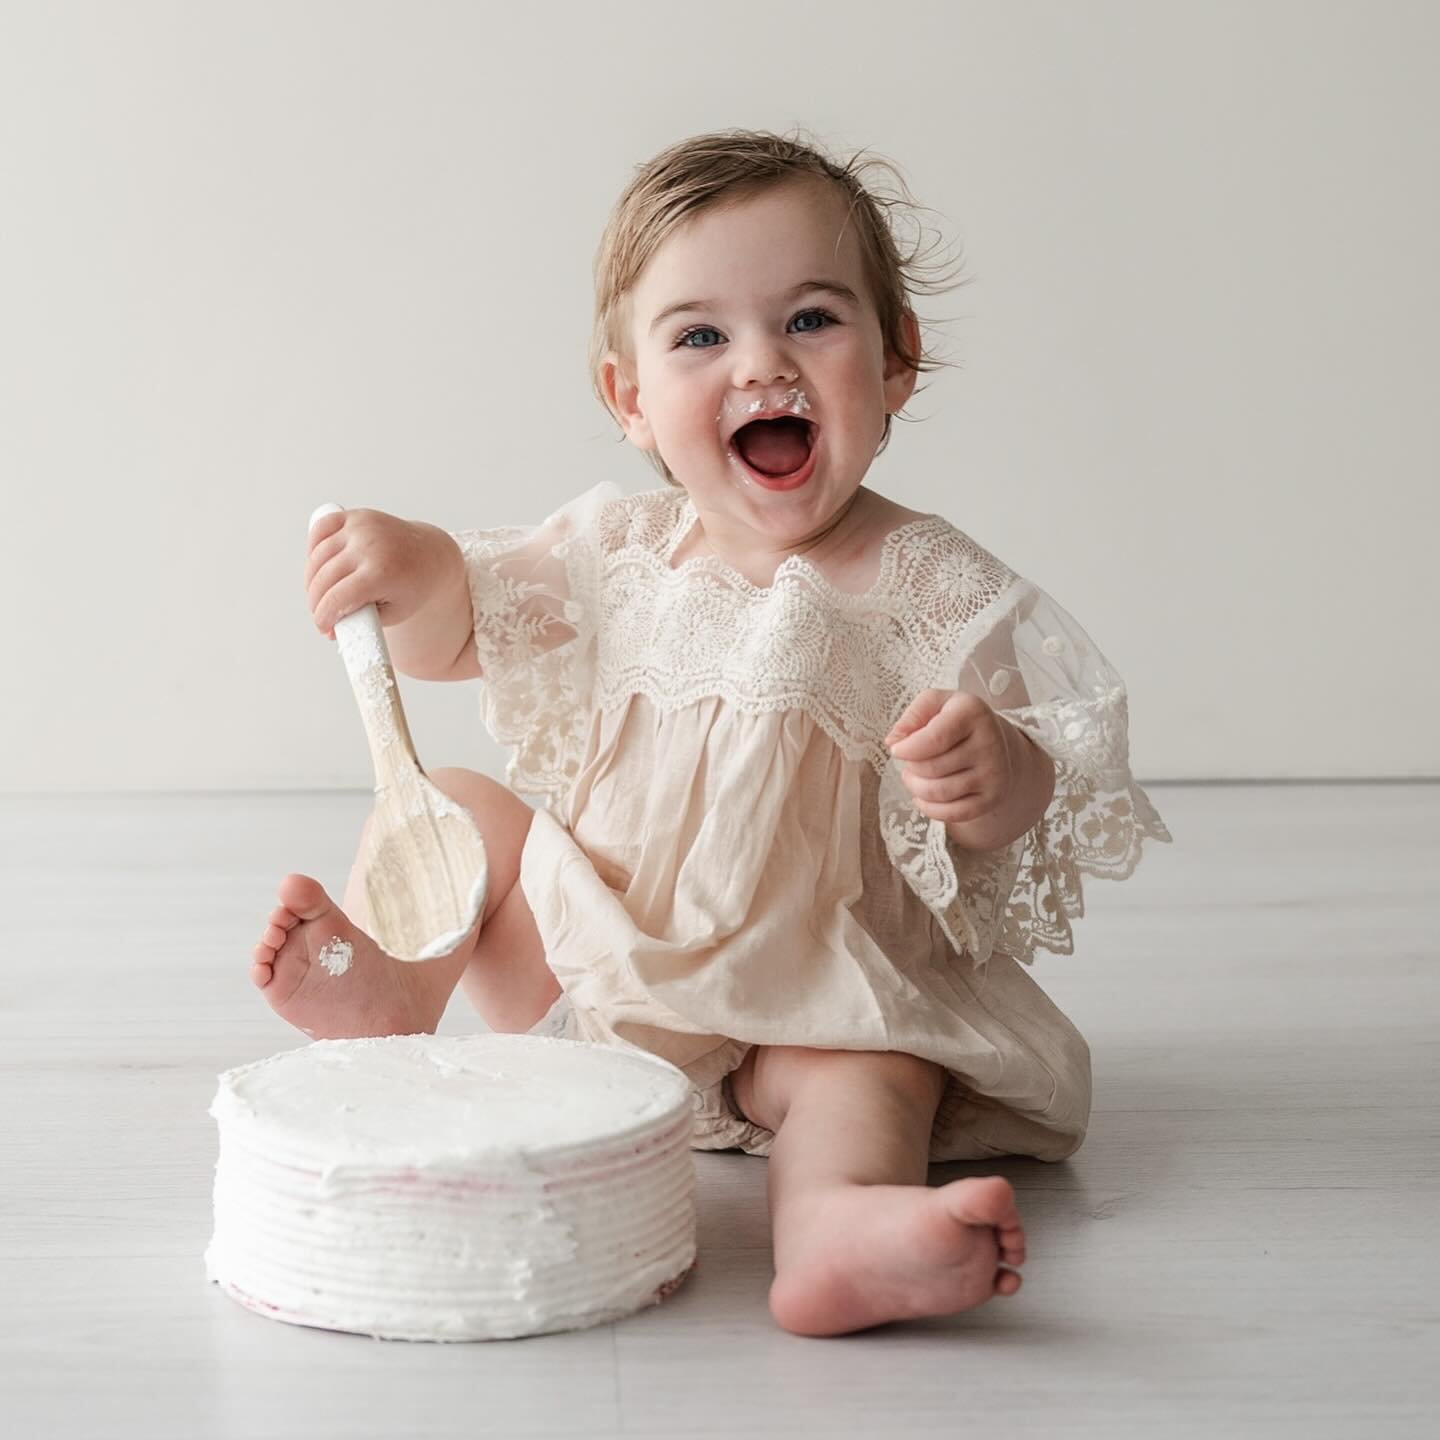 Birthday Fun - I have a couple of spots available this week (Monday and Wednesday) for studio milestone sessions, whether you would love a portrait session or cake smash for a birthday celebration or a sitter session for 6-9 month old. I would love t